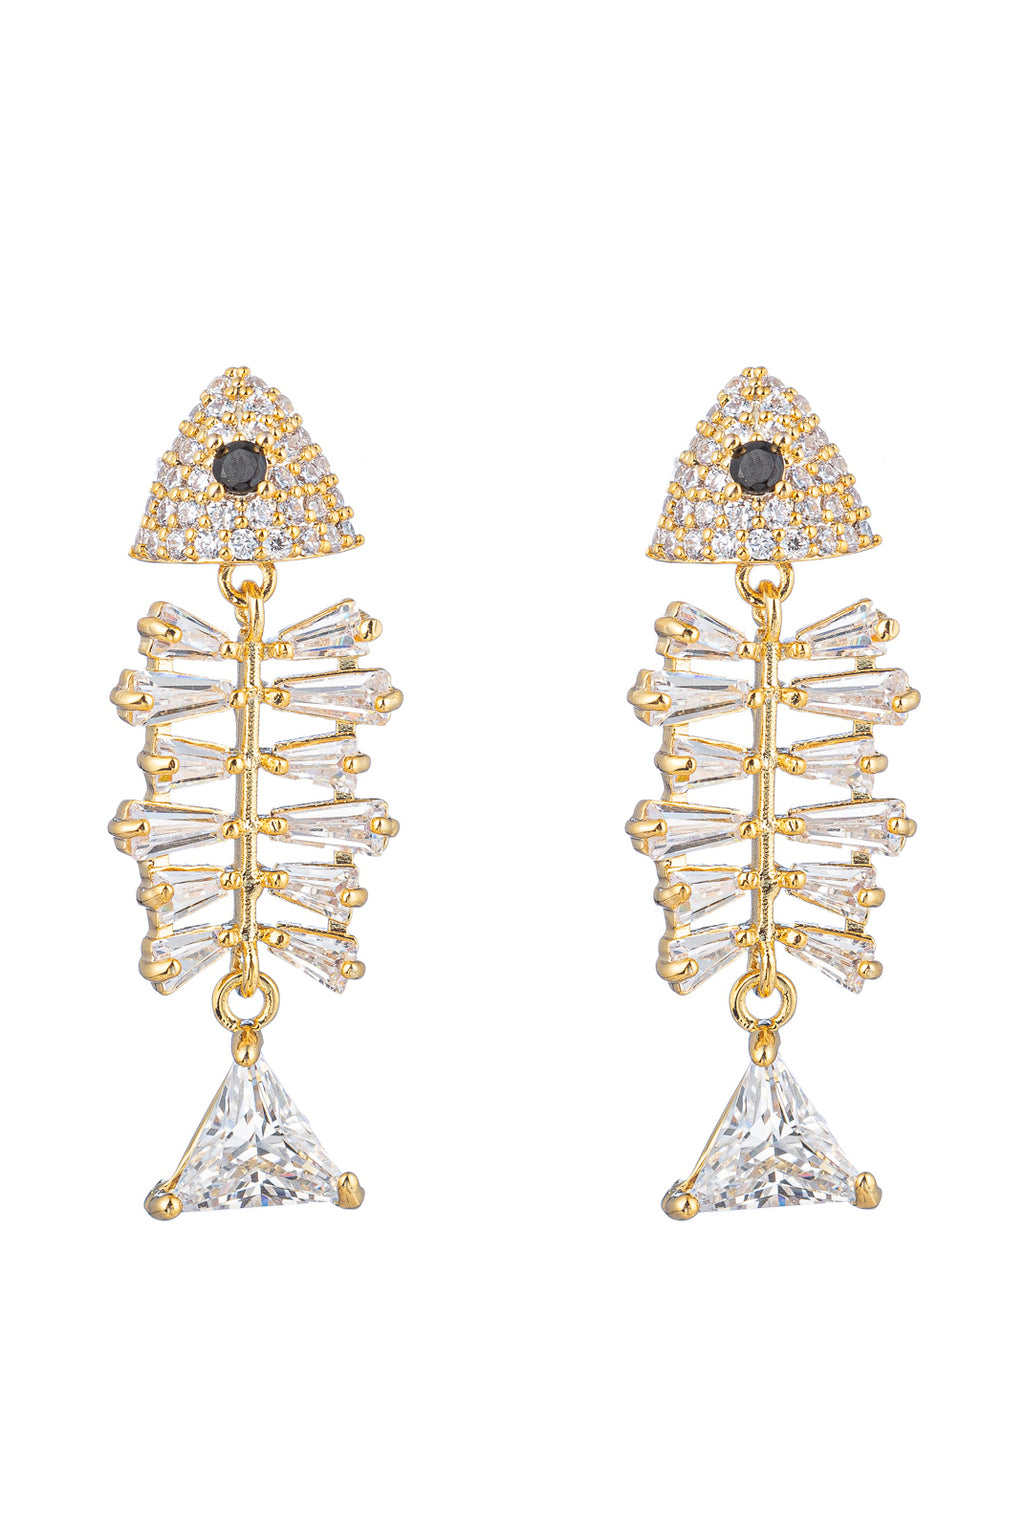 Gold brass fish pendant earrings studded with CZ crystals.